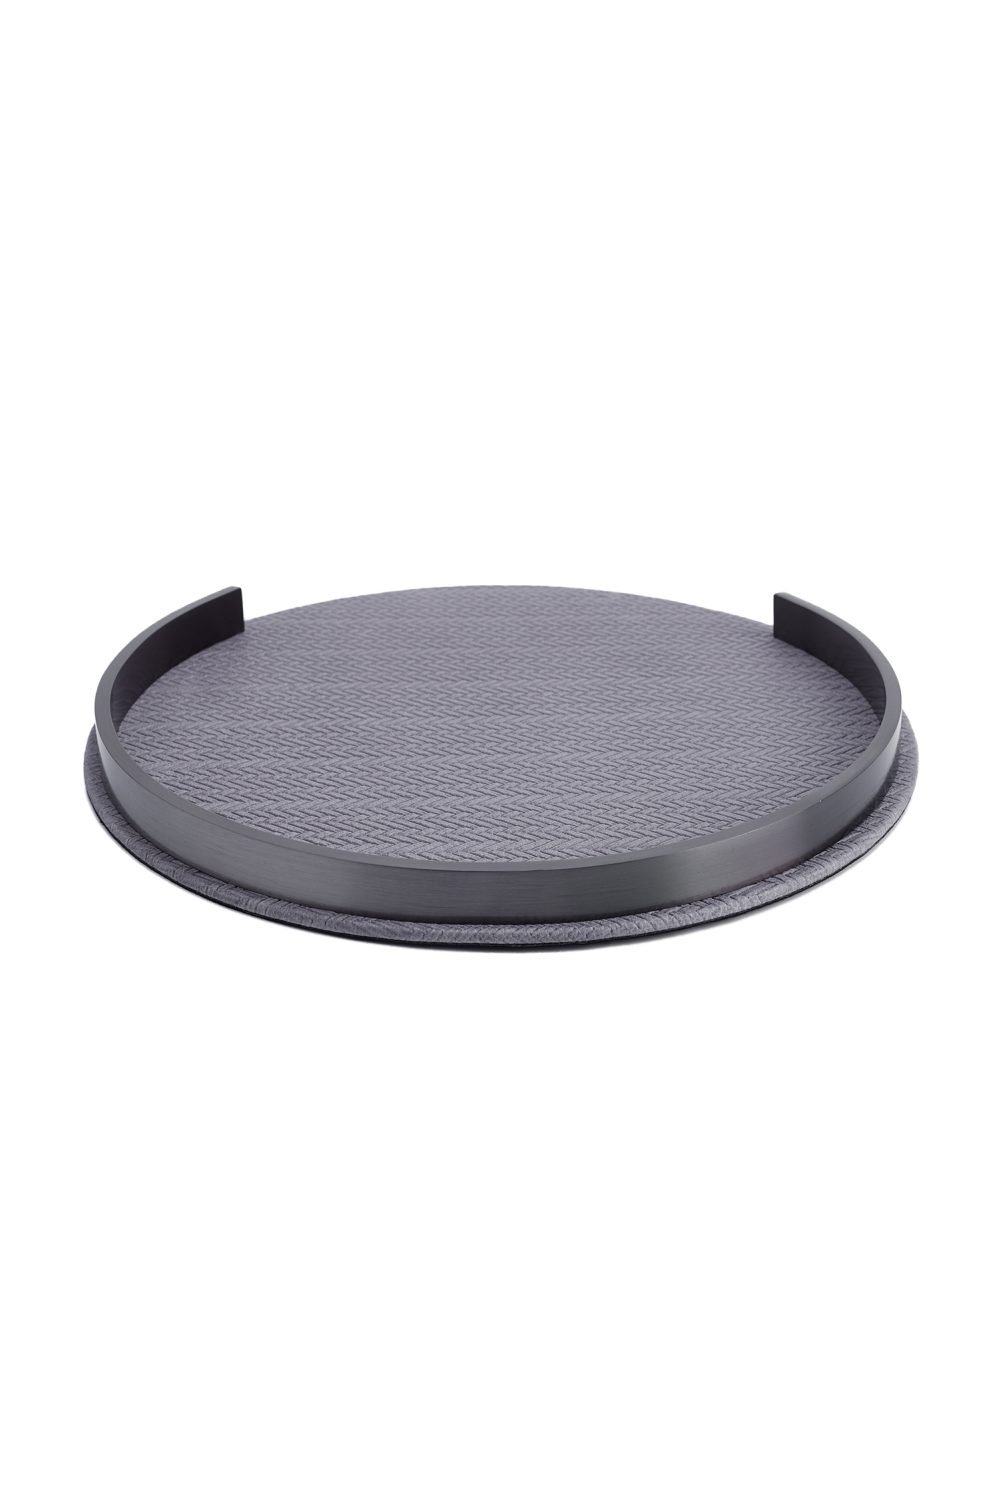 Embossed Leather Round Tray | Liang & Eimil Arabella | OROA.com